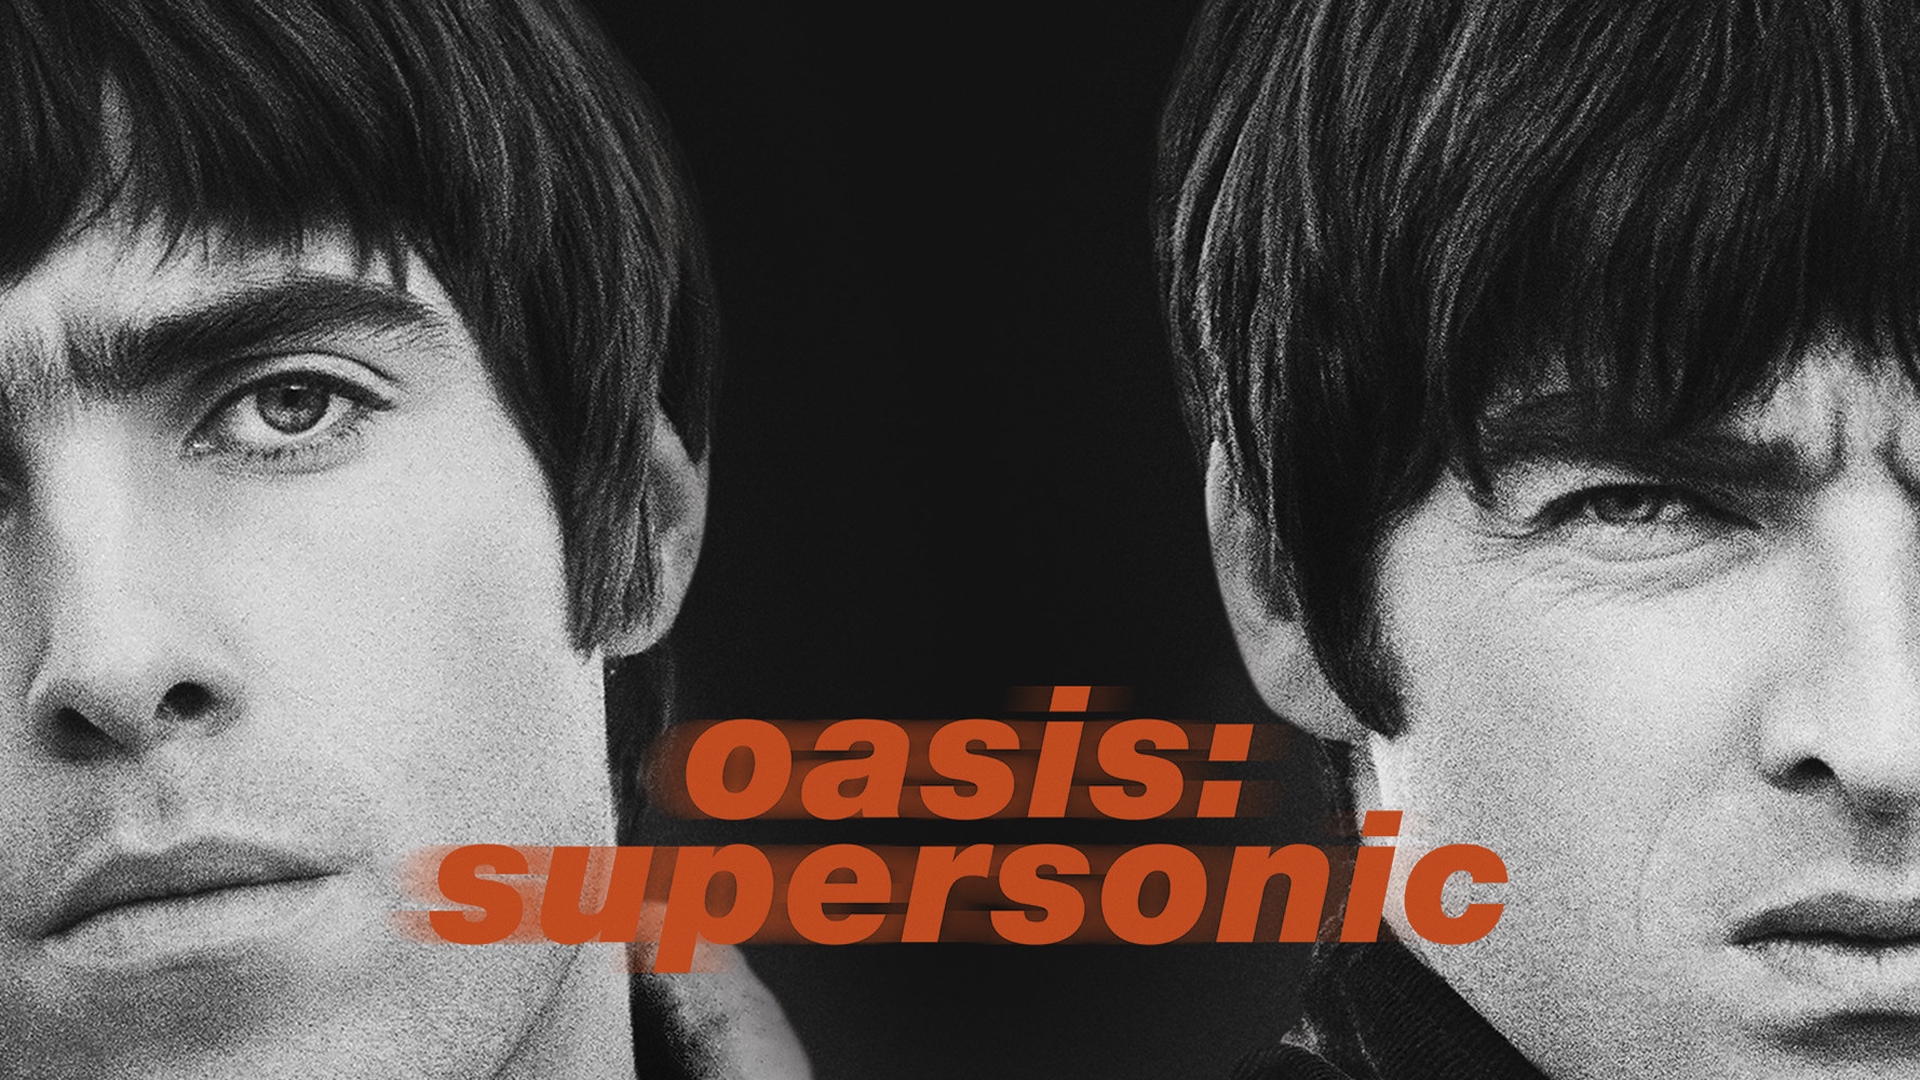  Oasis - Supersonic [Blu-ray] : Movies & TV